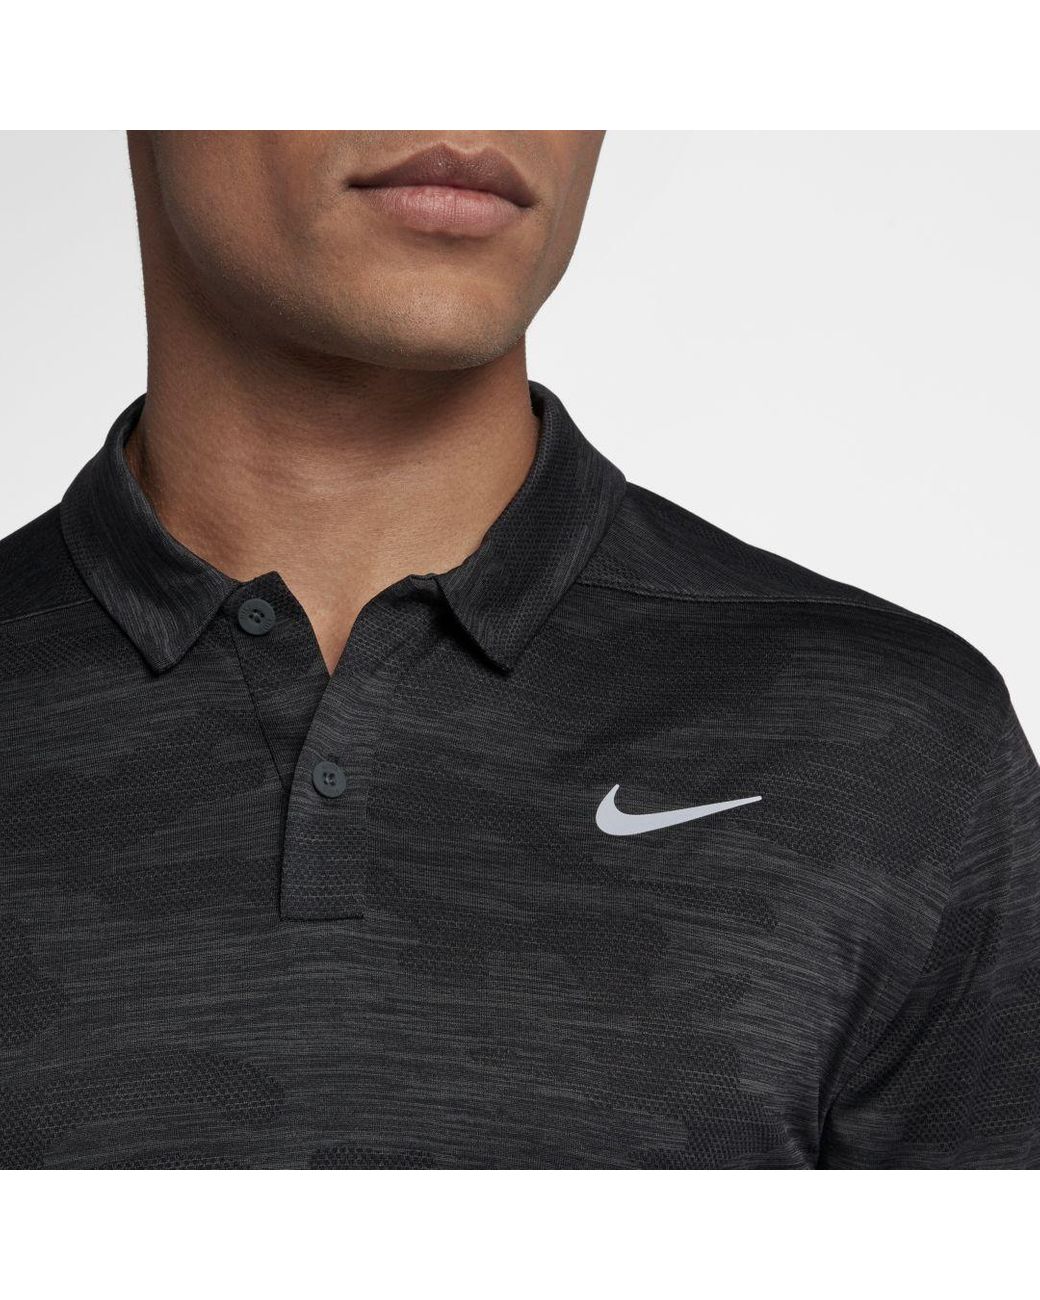 Nike Zonal Cooling Camo Golf Polo | Lyst